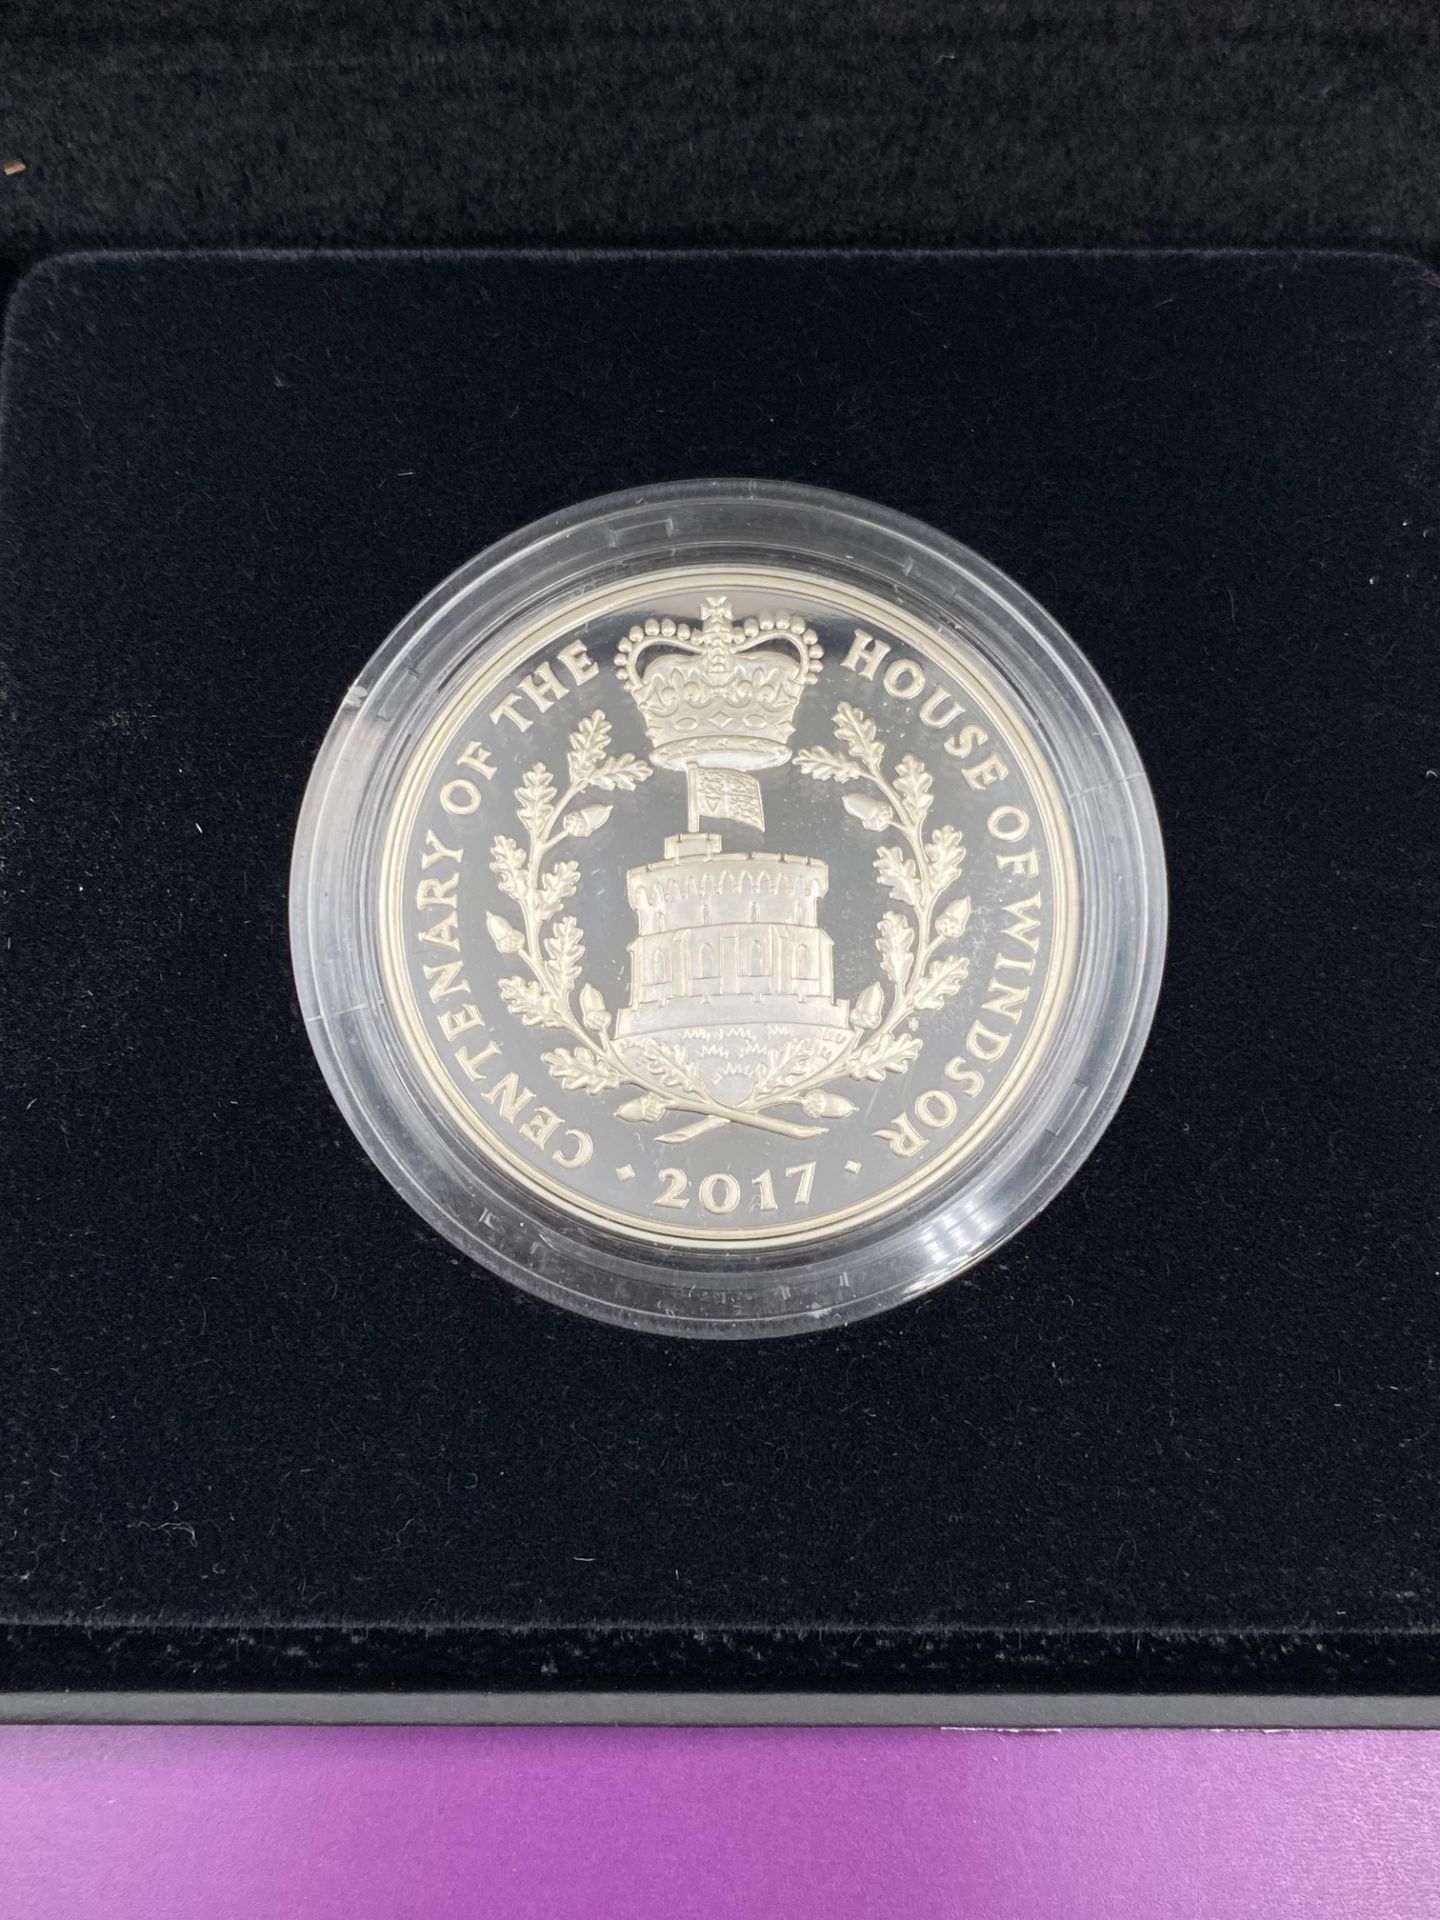 Royal Mint Centenary of the House of Windsor £5 silver proof coin - Image 3 of 4